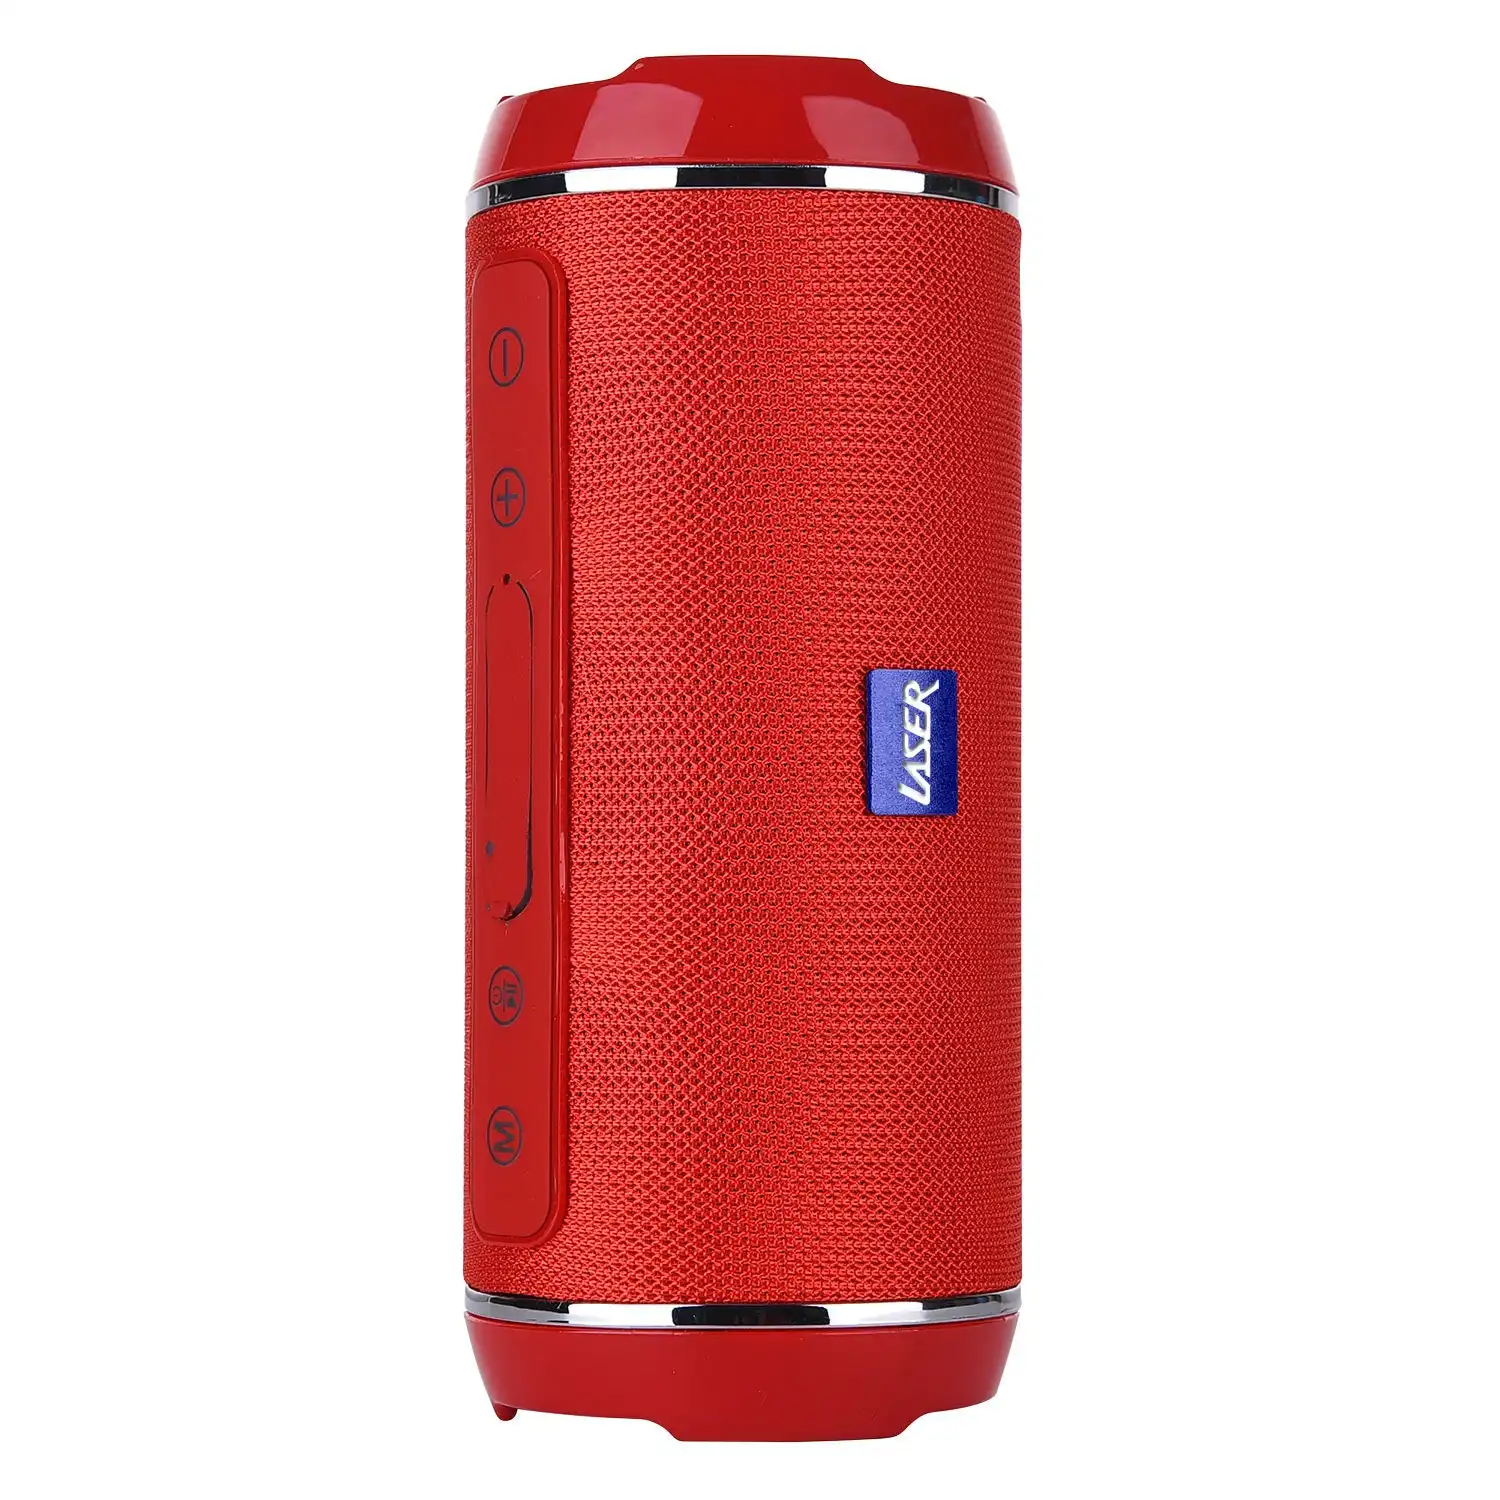 TWS Portable Wireless Bluetooth Speaker Outdoor Rechargeable USB/AUX Red